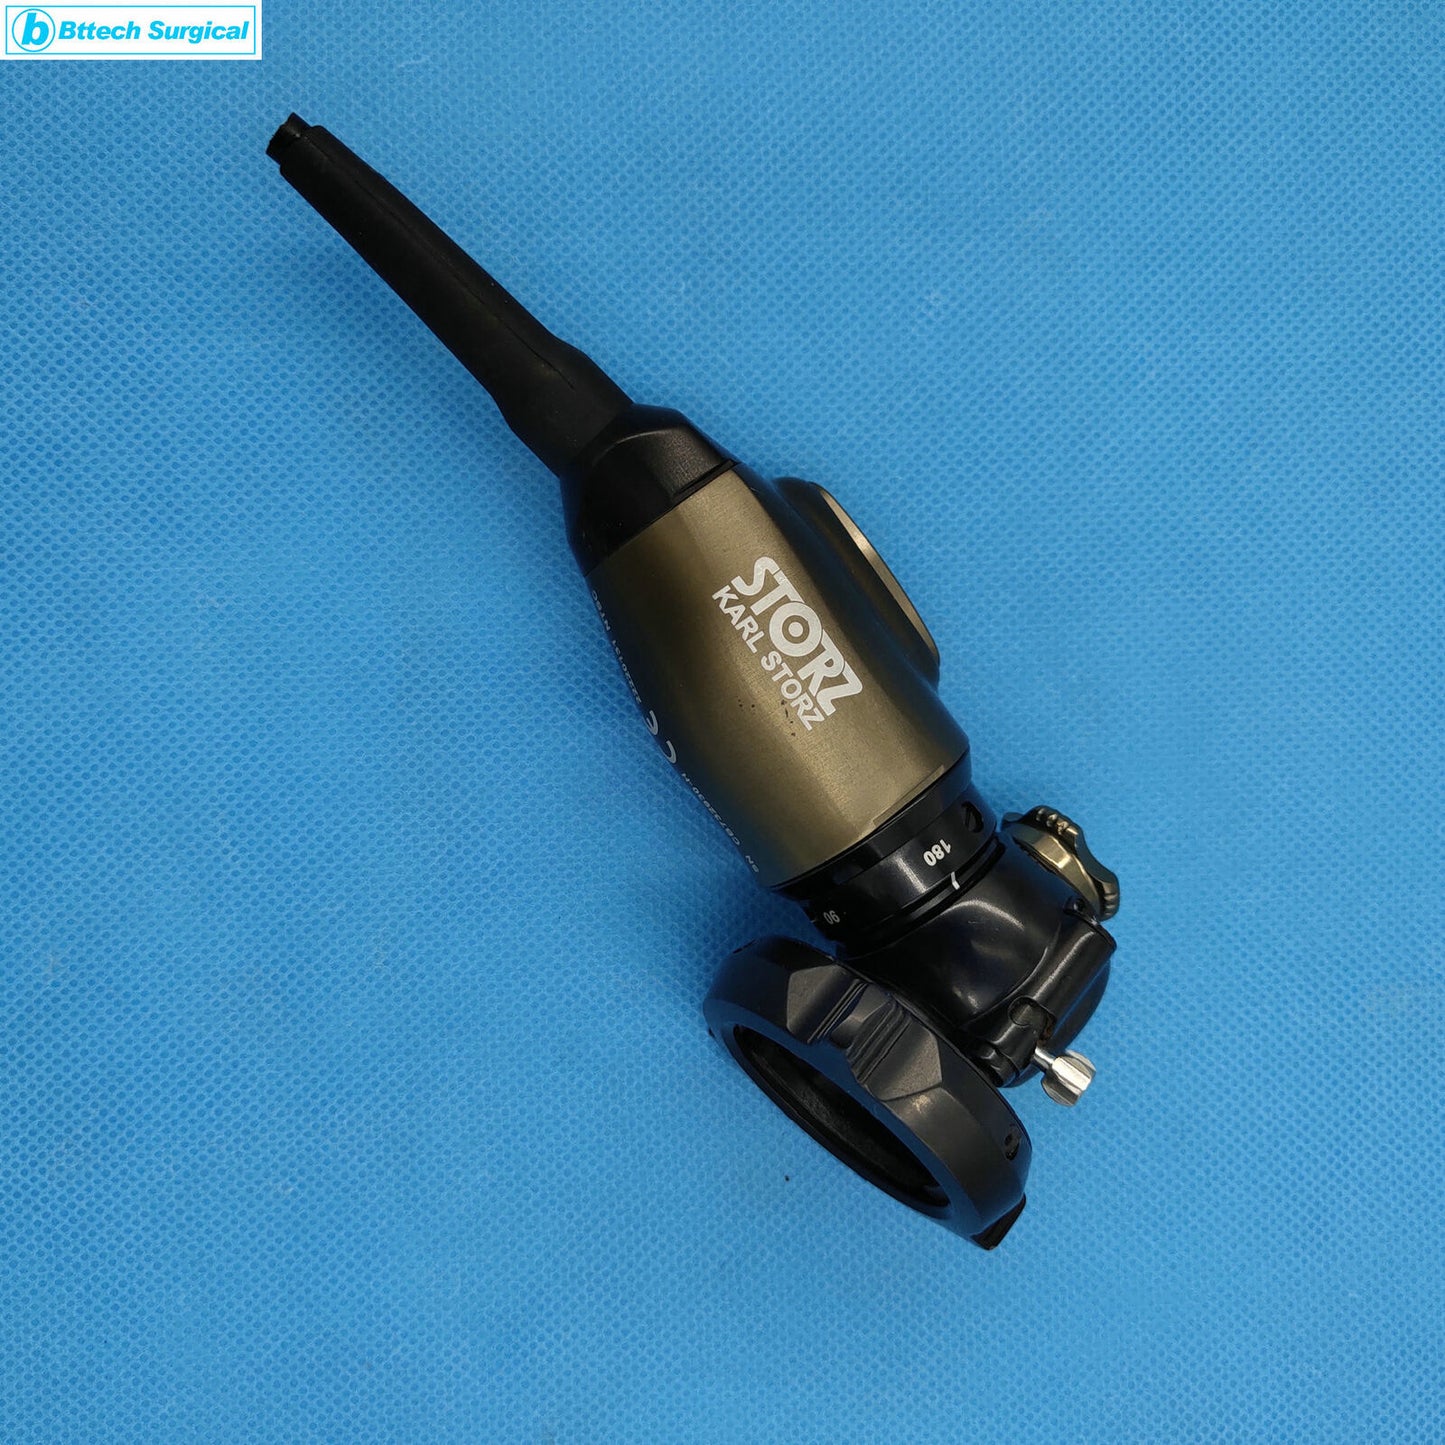 Karl Storz Endoscope P3 Camera Head 22220131 Cable Cut AS-IS